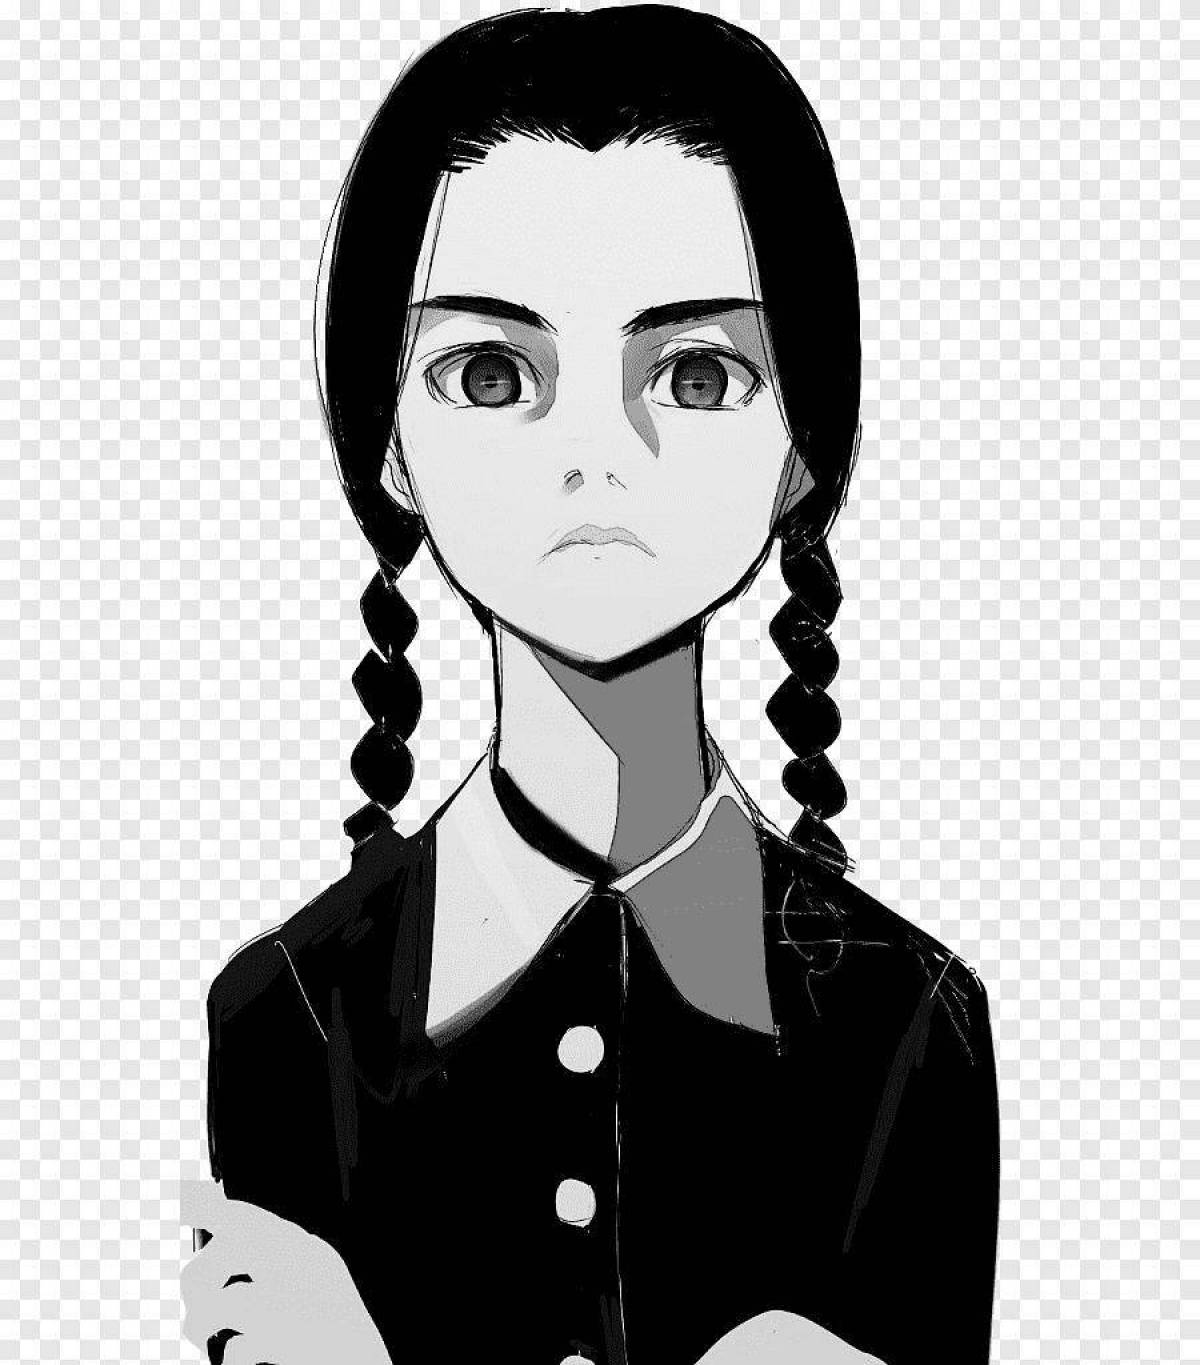 Wednesday Addams from series #5